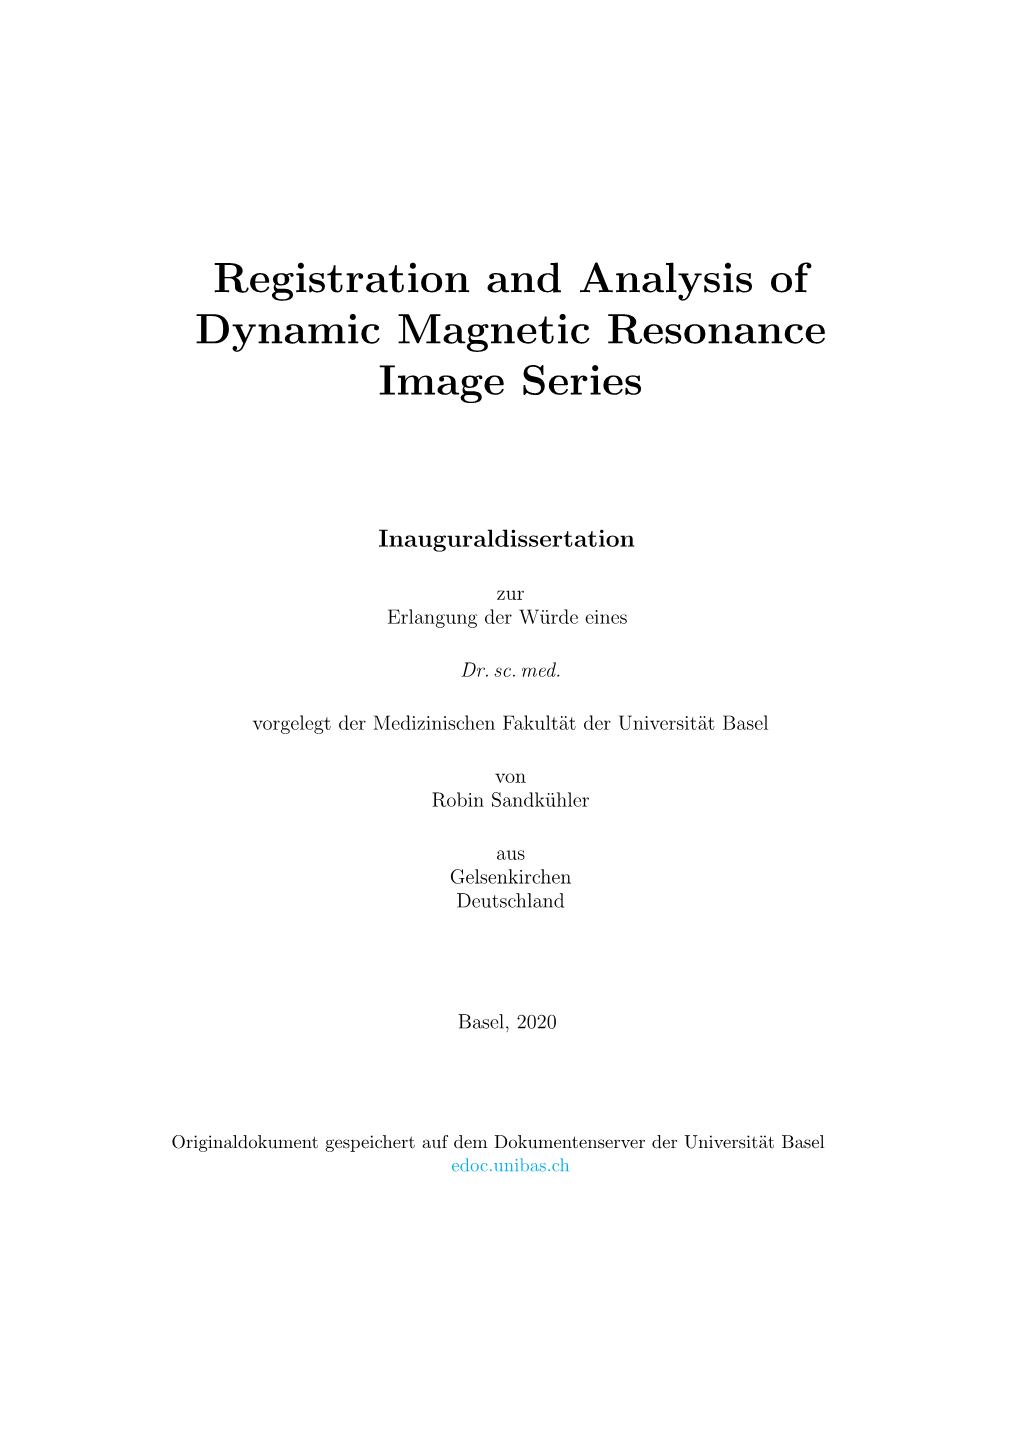 Registration and Analysis of Dynamic Magnetic Resonance Image Series